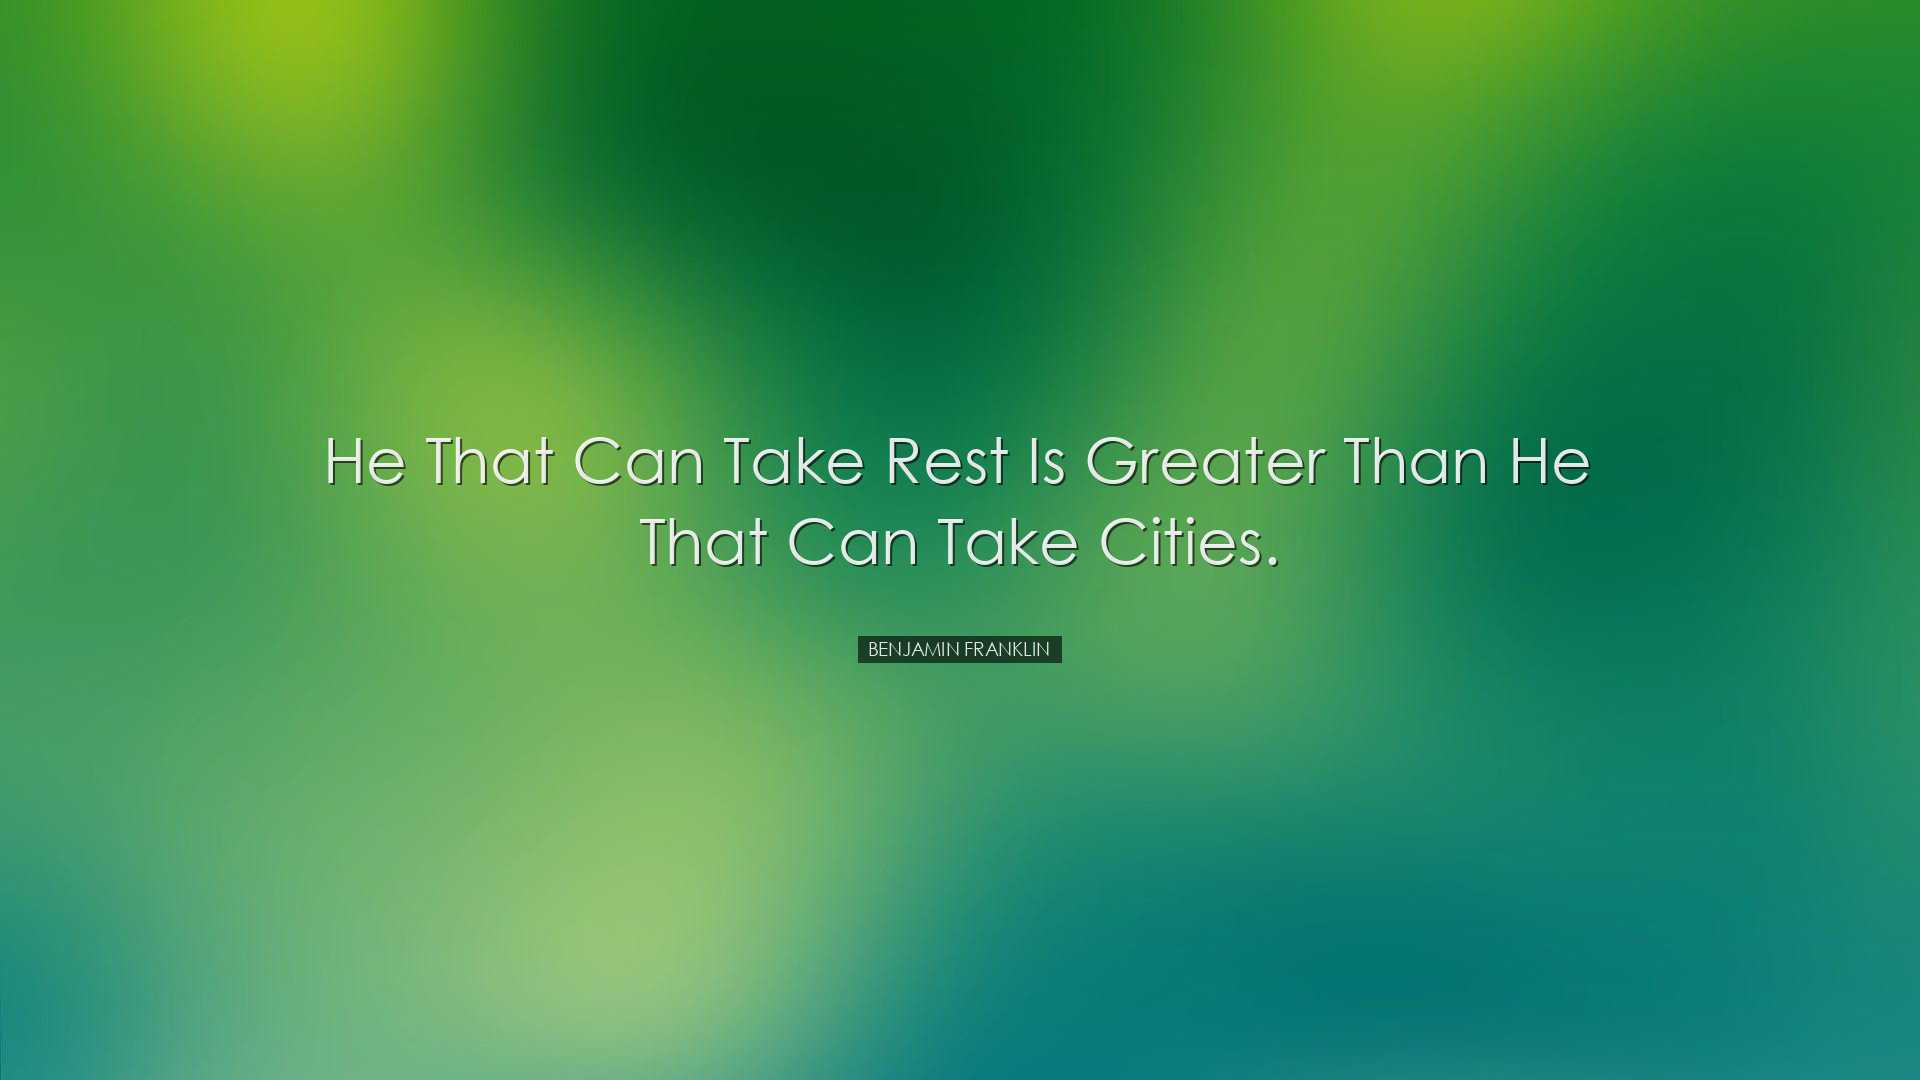 He that can take rest is greater than he that can take cities. - B